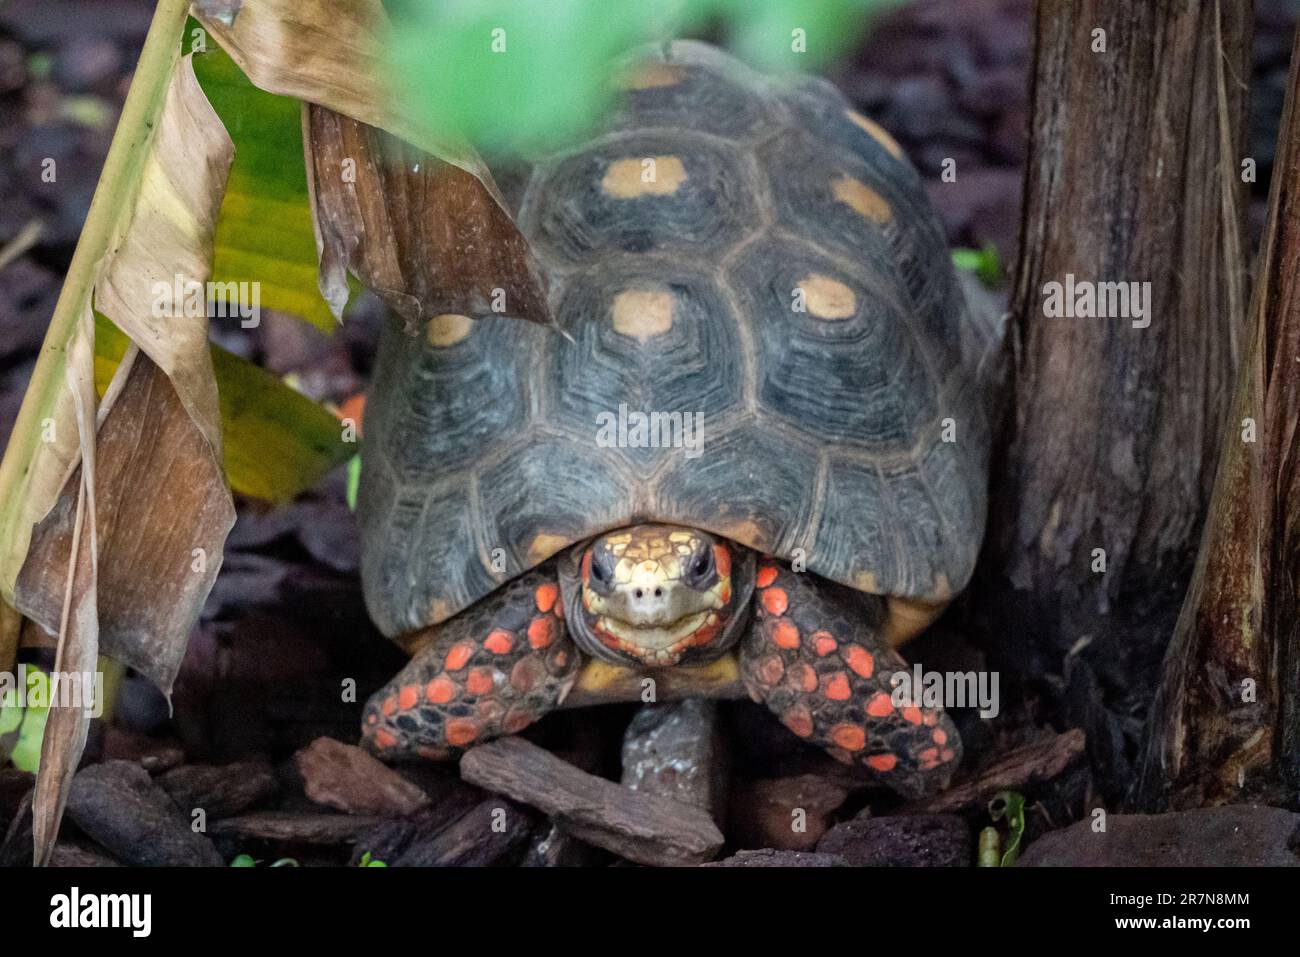 A close-up of a turtle peeking out from behind a cluster of green foliage, with patterned leaves in the background Stock Photo